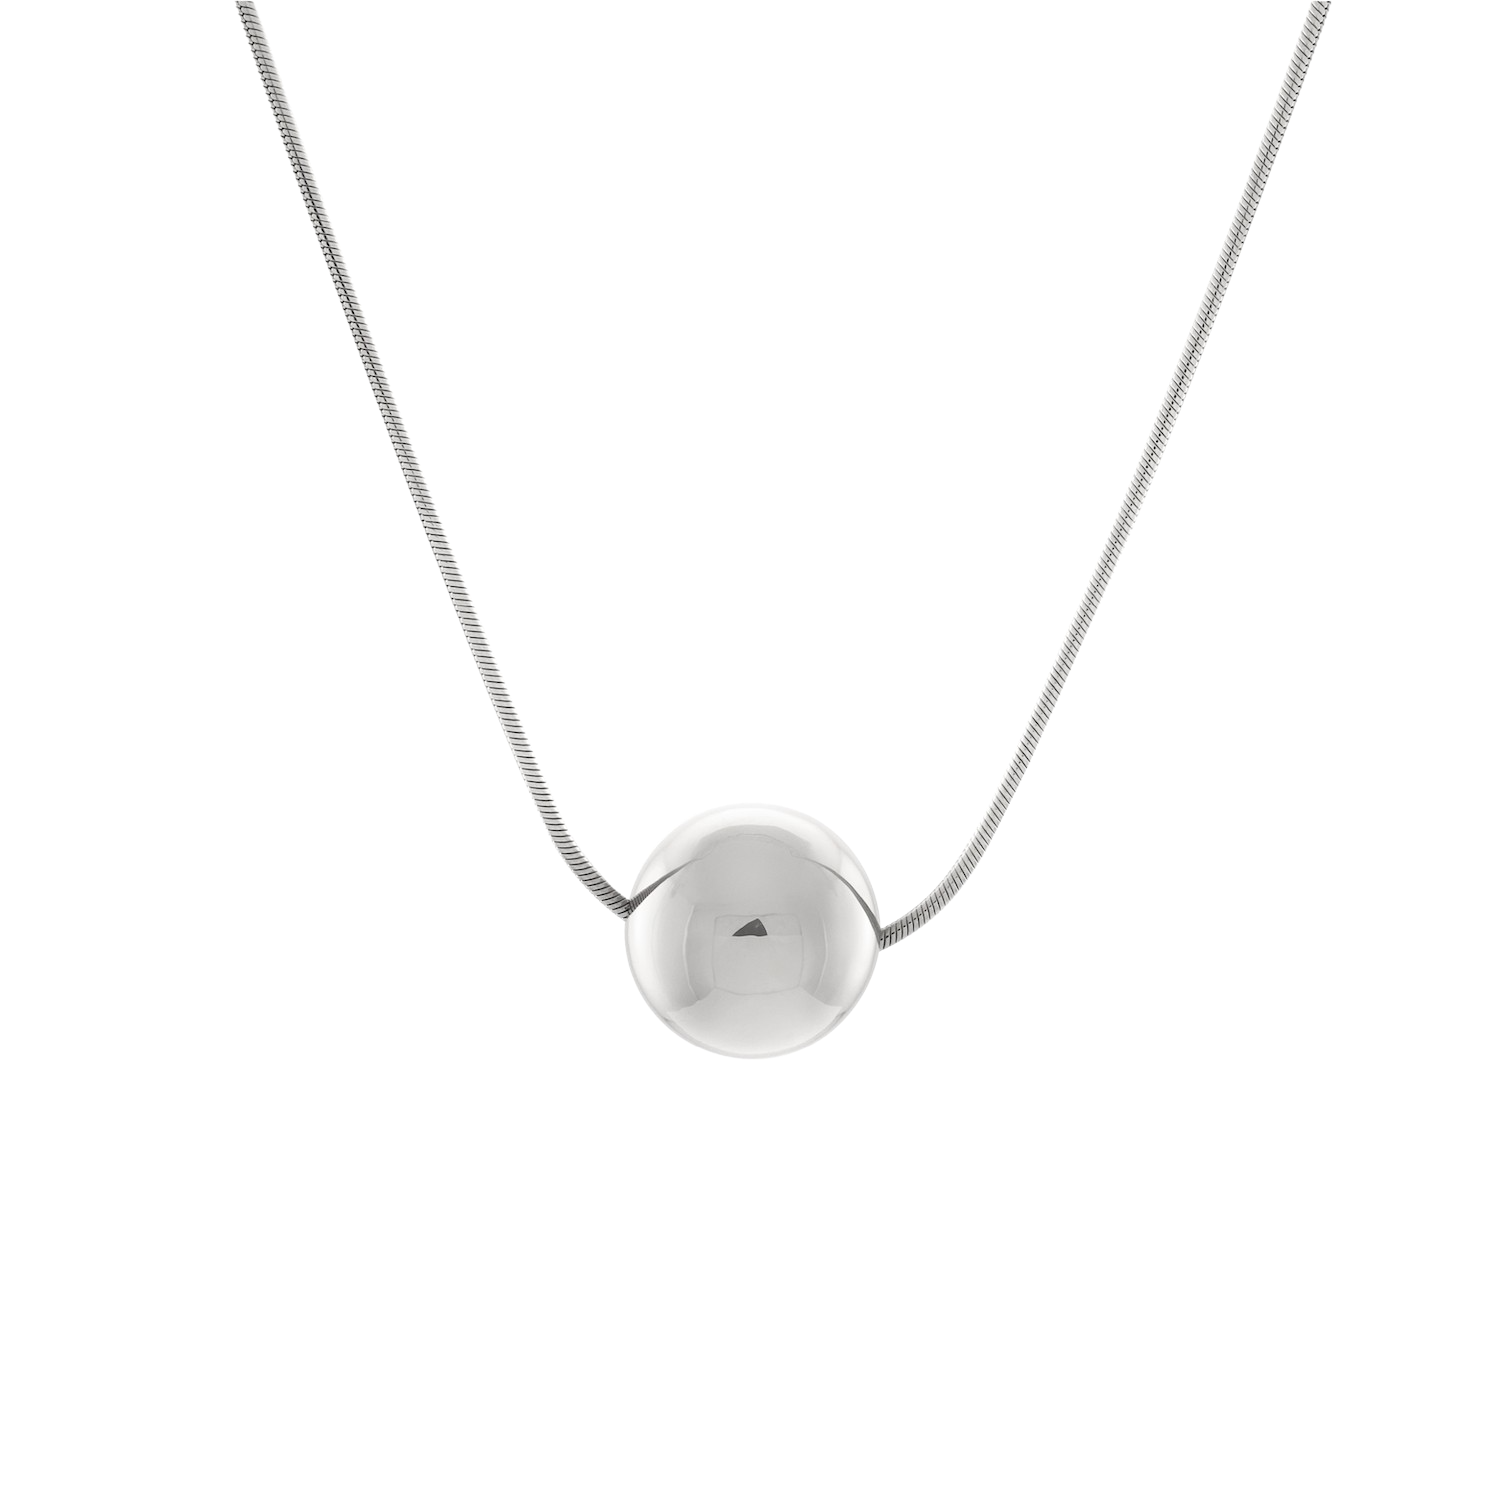 Josephine_Orb_Necklace__Silver-removebg.png